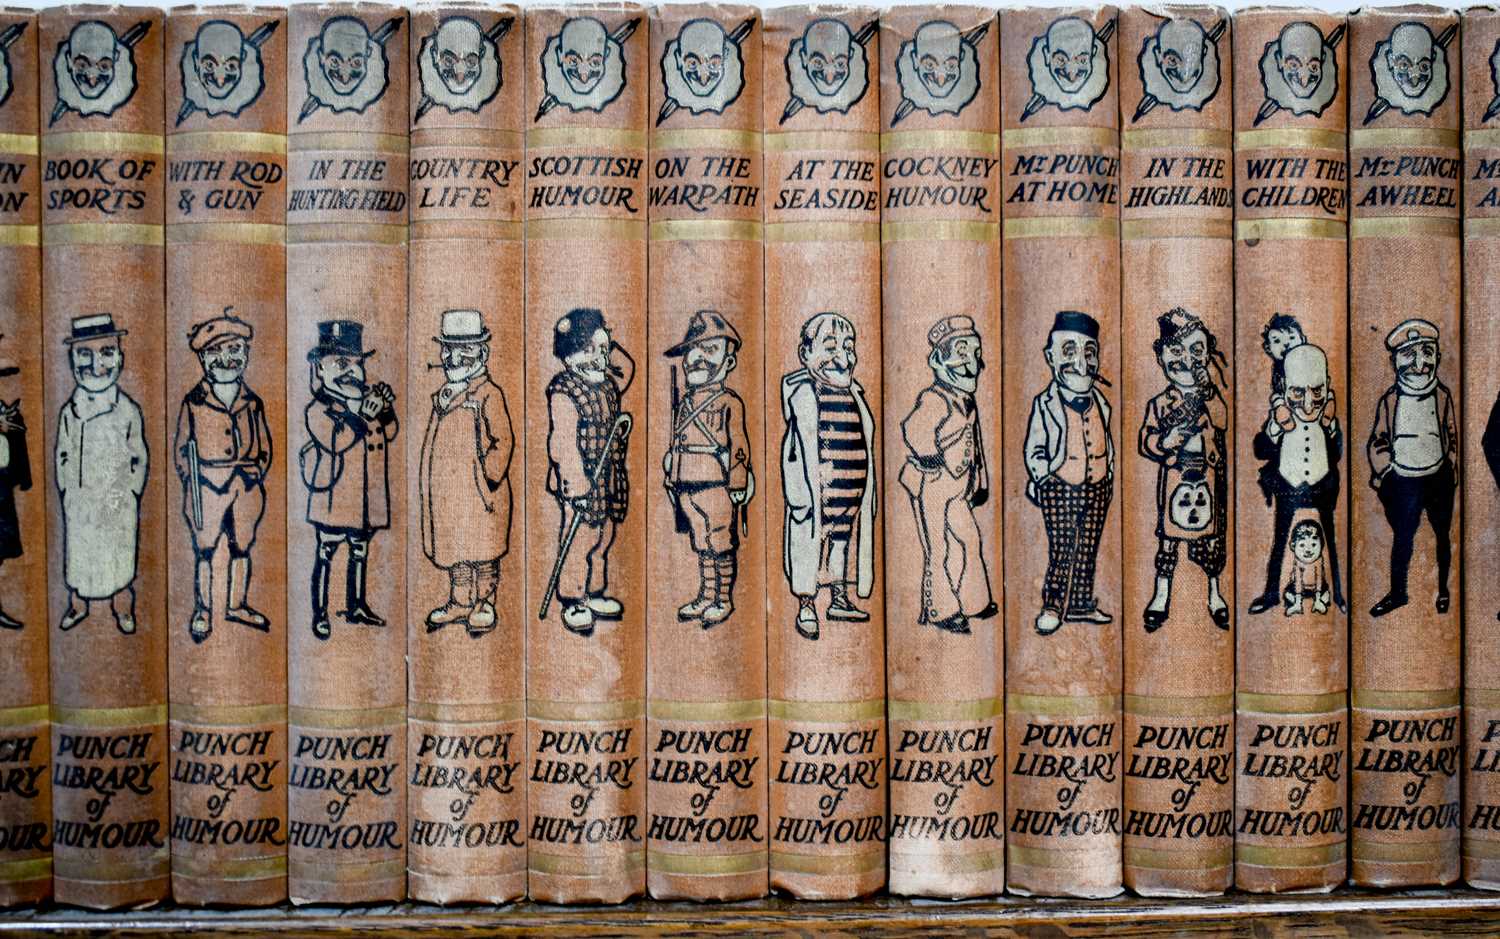 A set of Punch Library of Humour, 25 volumes, circa 1920, with pictorial cloth bindings, with oak - Bild 2 aus 2